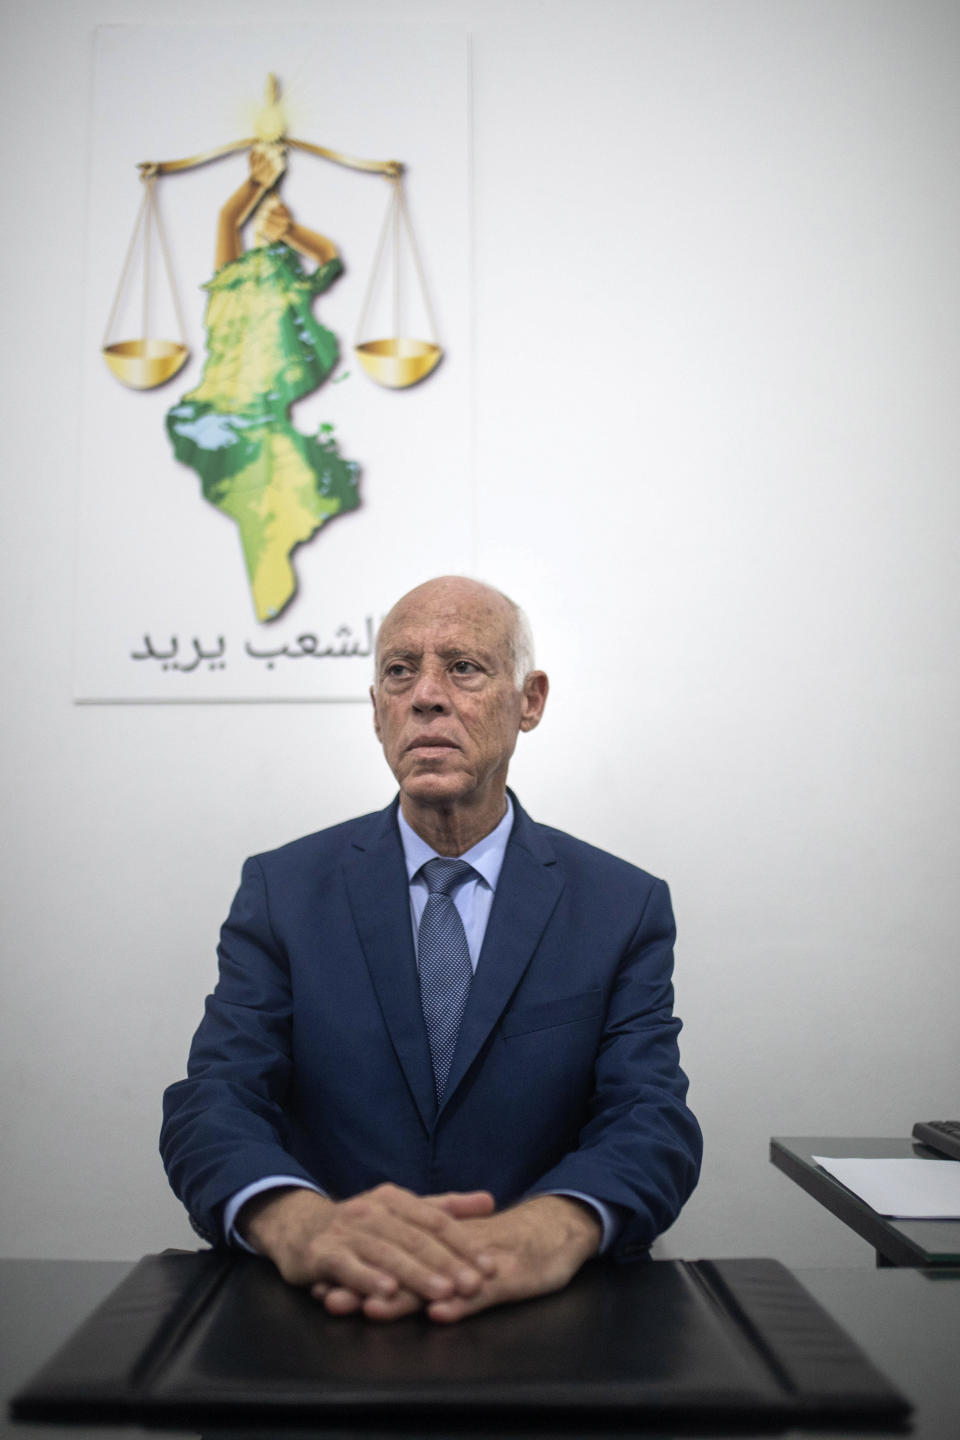 Tunisian former conservative constitutional law professor Kais Saied poses in his office in Tunis, Tunisia, Tuesday, Sept. 17, 2019. With more than half the votes in Tunisia's presidential race counted, Kais Saied was in the lead. Media magnate Nabil Karoui, a more modernizing candidate, was in second place with 15.5%. (AP Photo/Mosa'ab Elshamy)